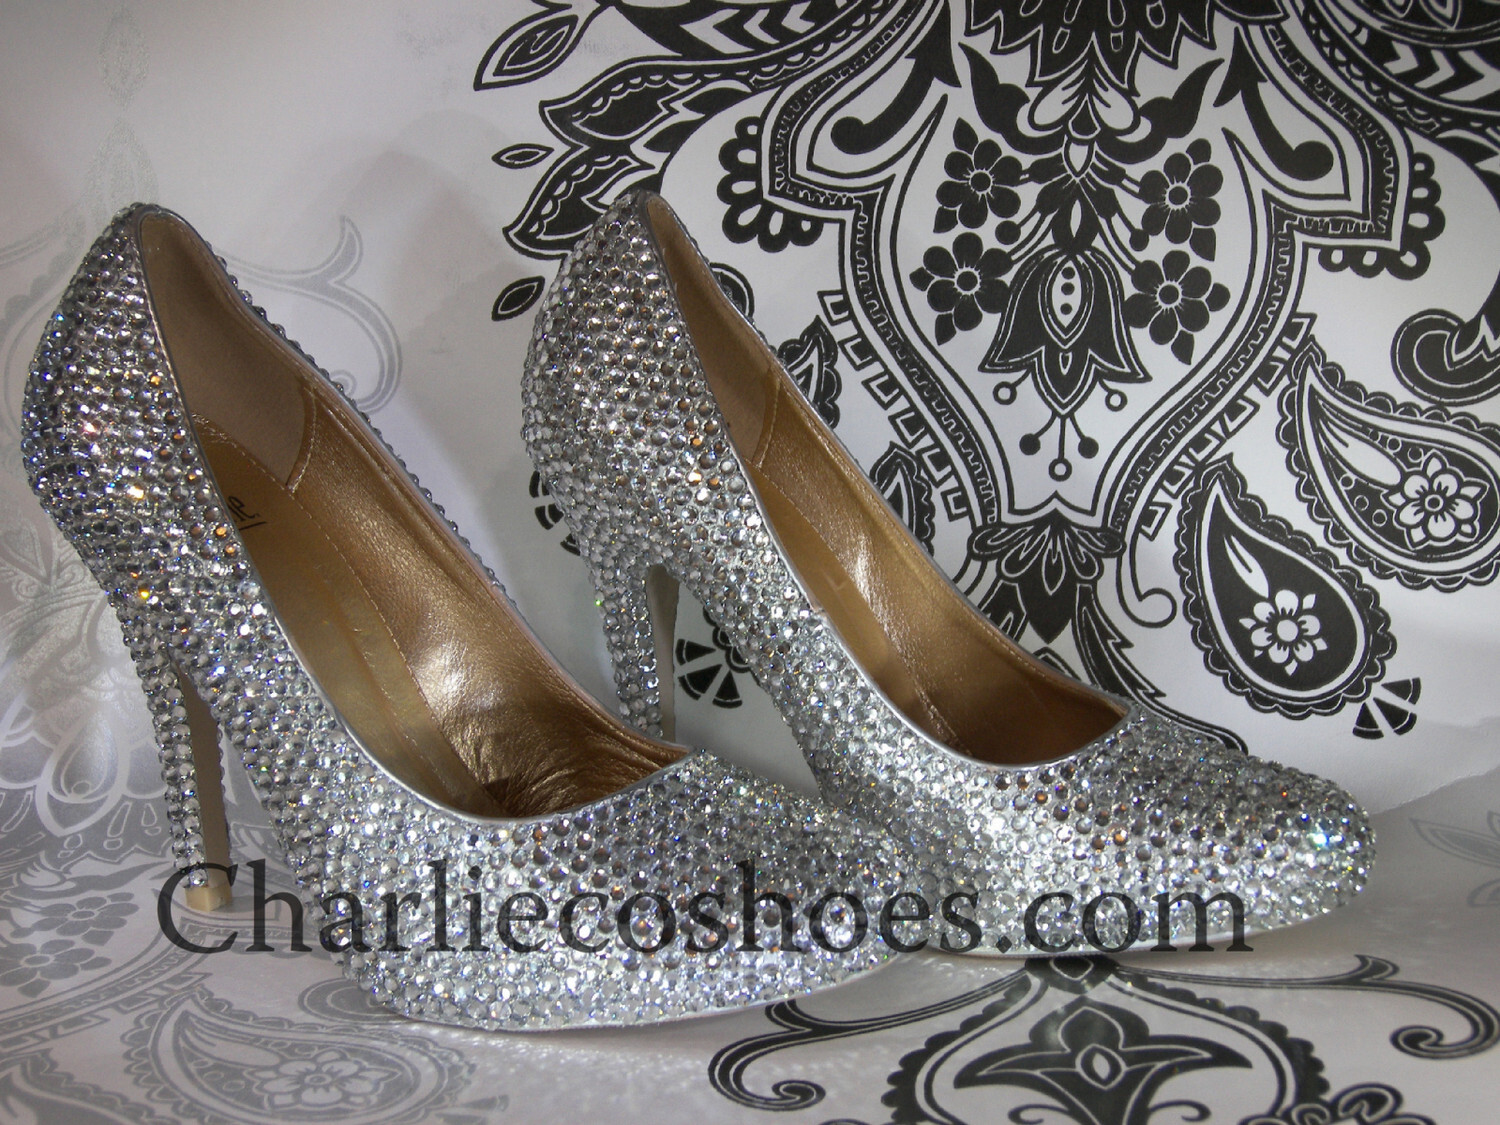 Diamond Stilettos Wedding Shoes from Charlie Co Shoes - hitched.ie